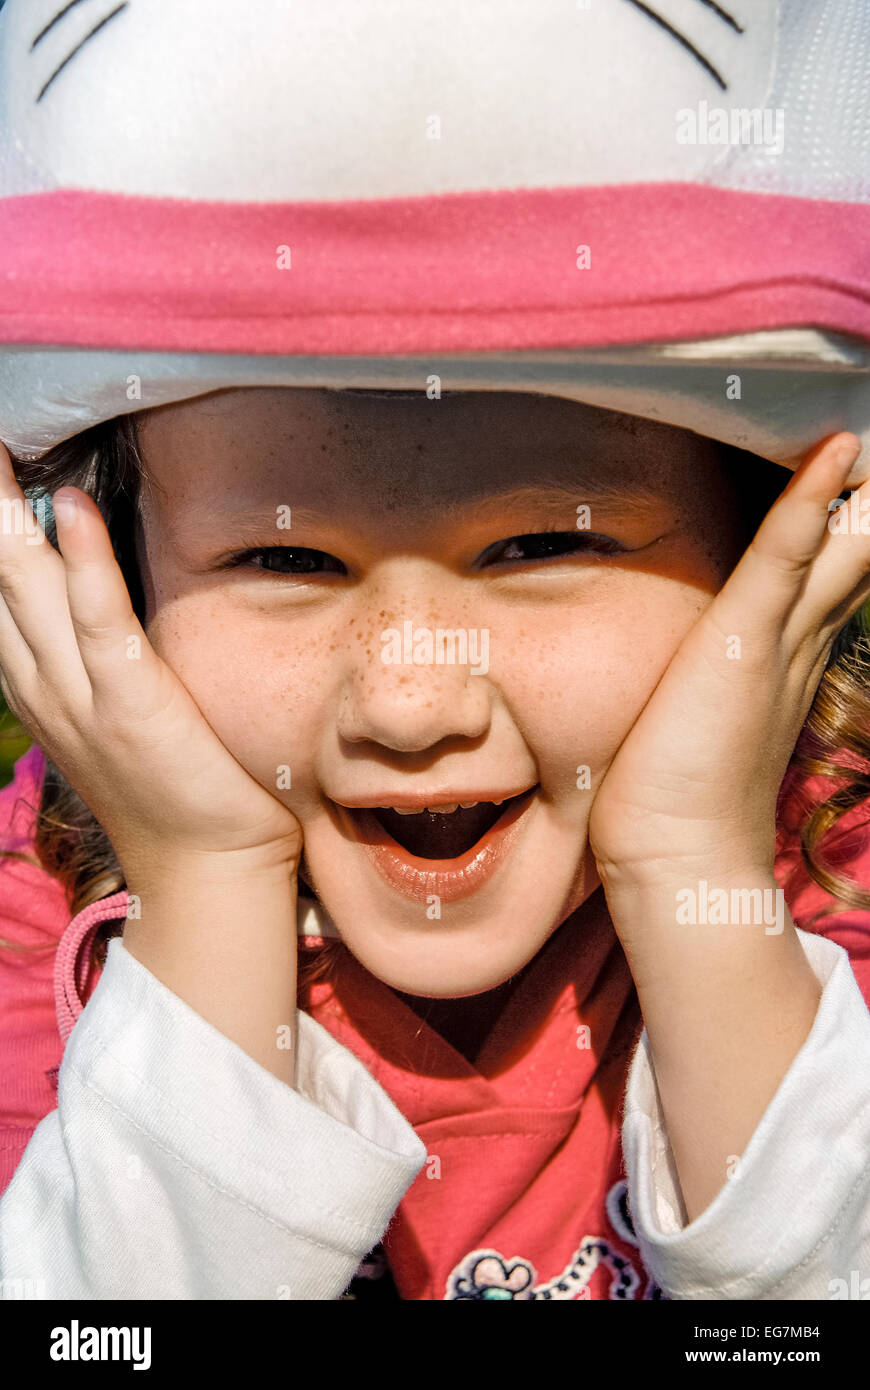 Smiling five year old girl with bike safety helmet. Stock Photo